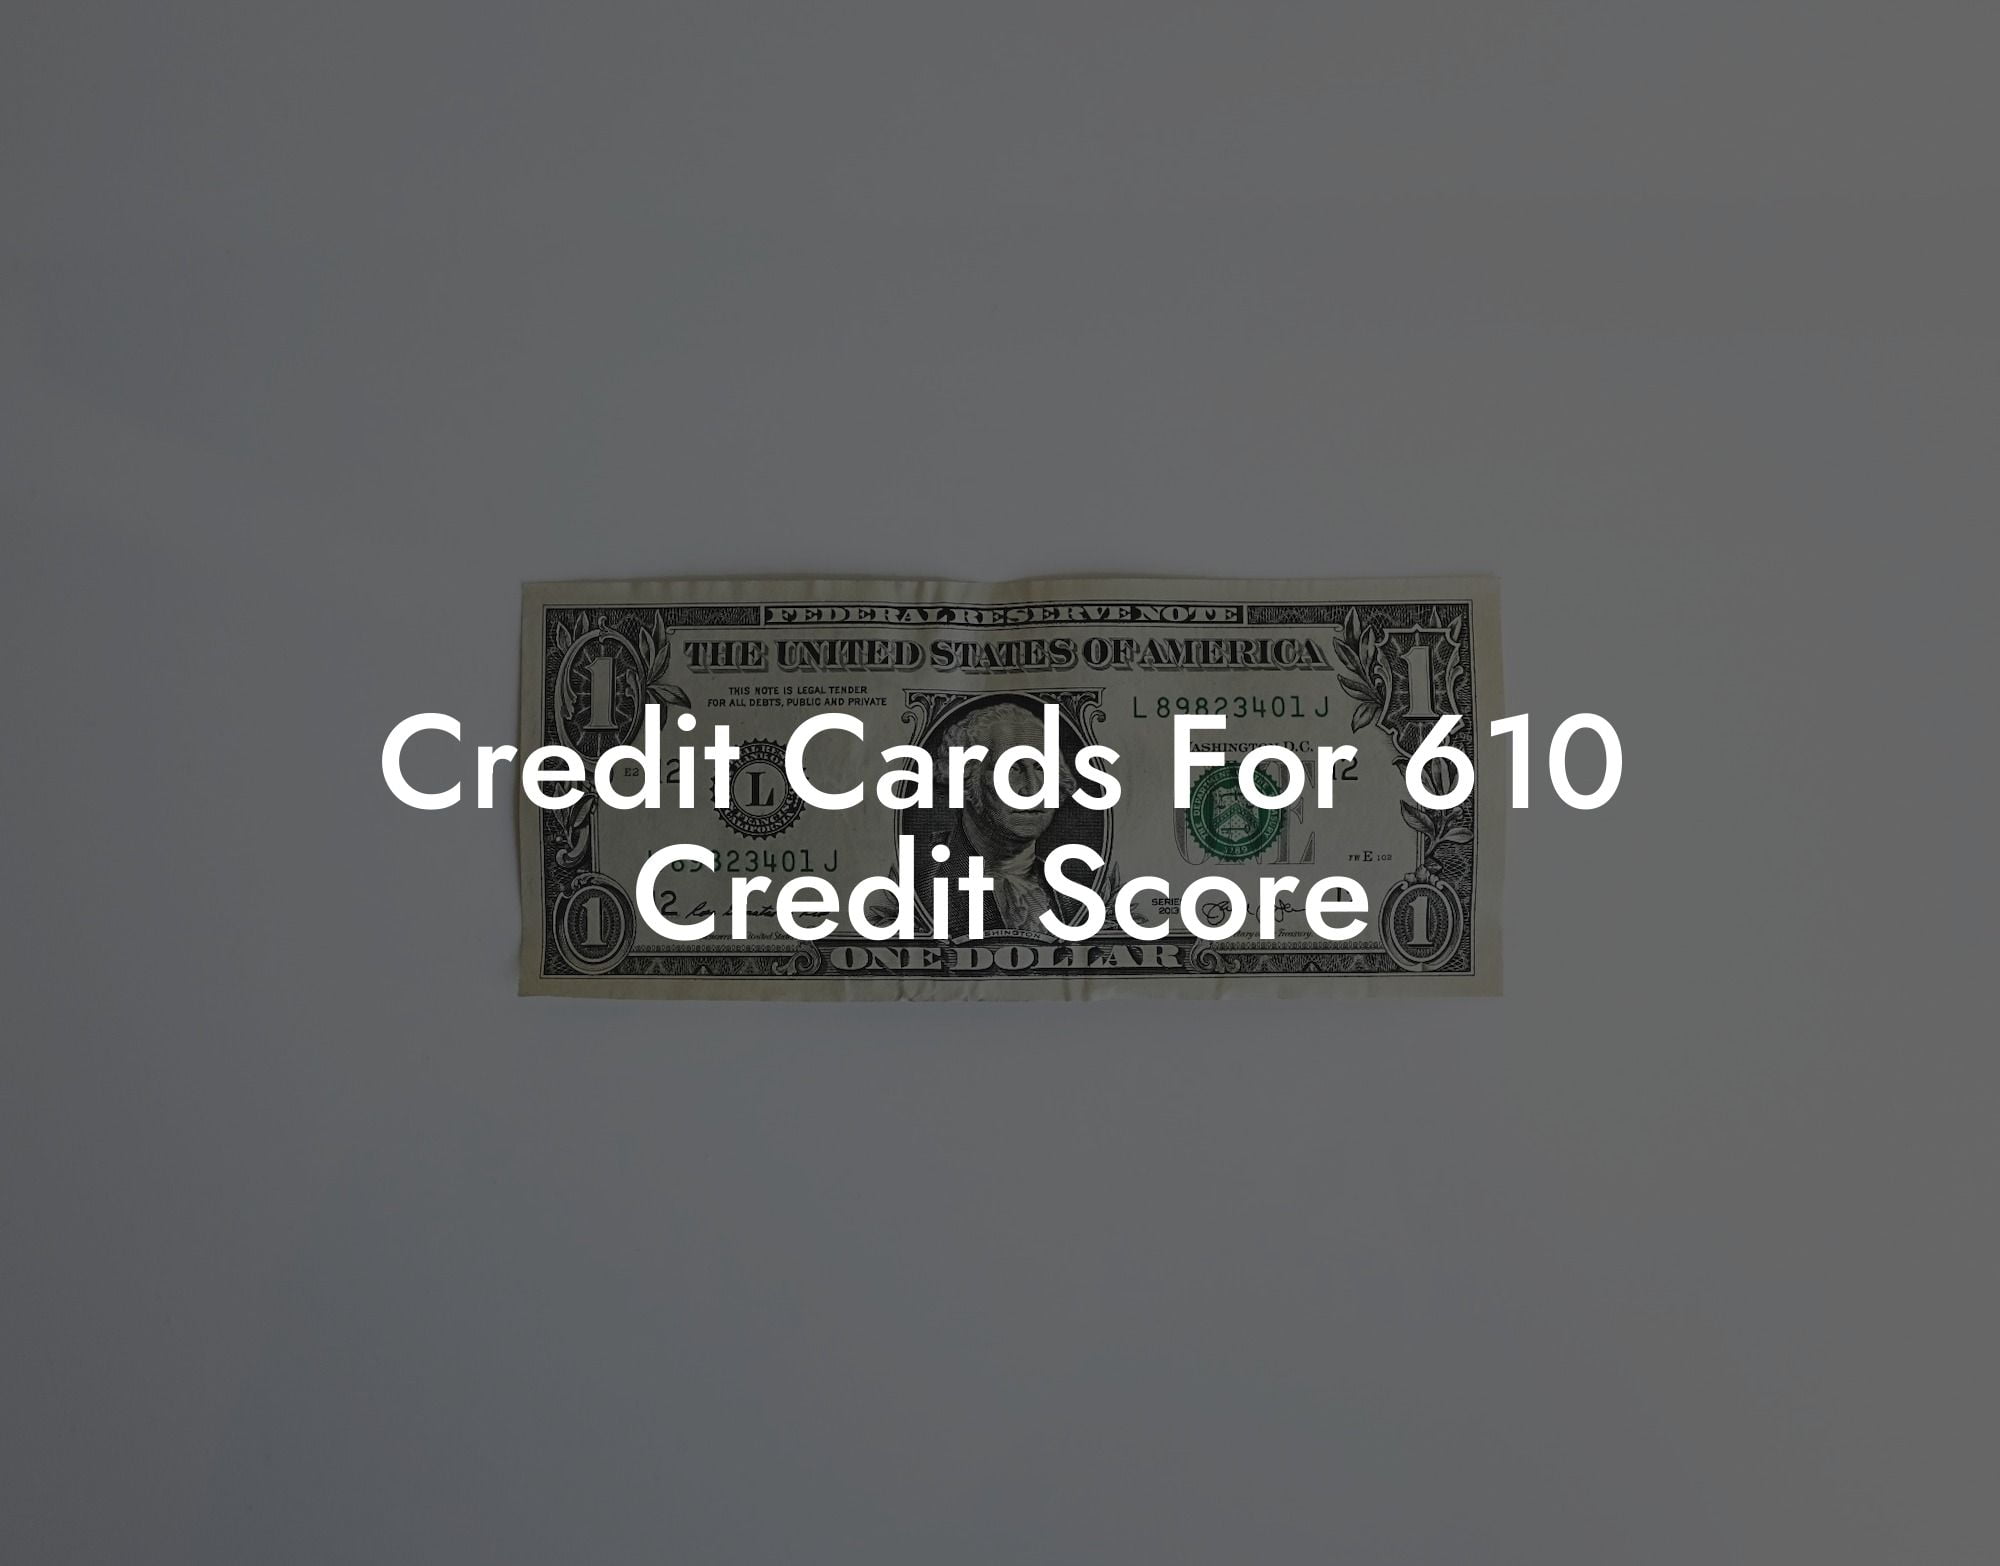 Credit Cards For 610 Credit Score